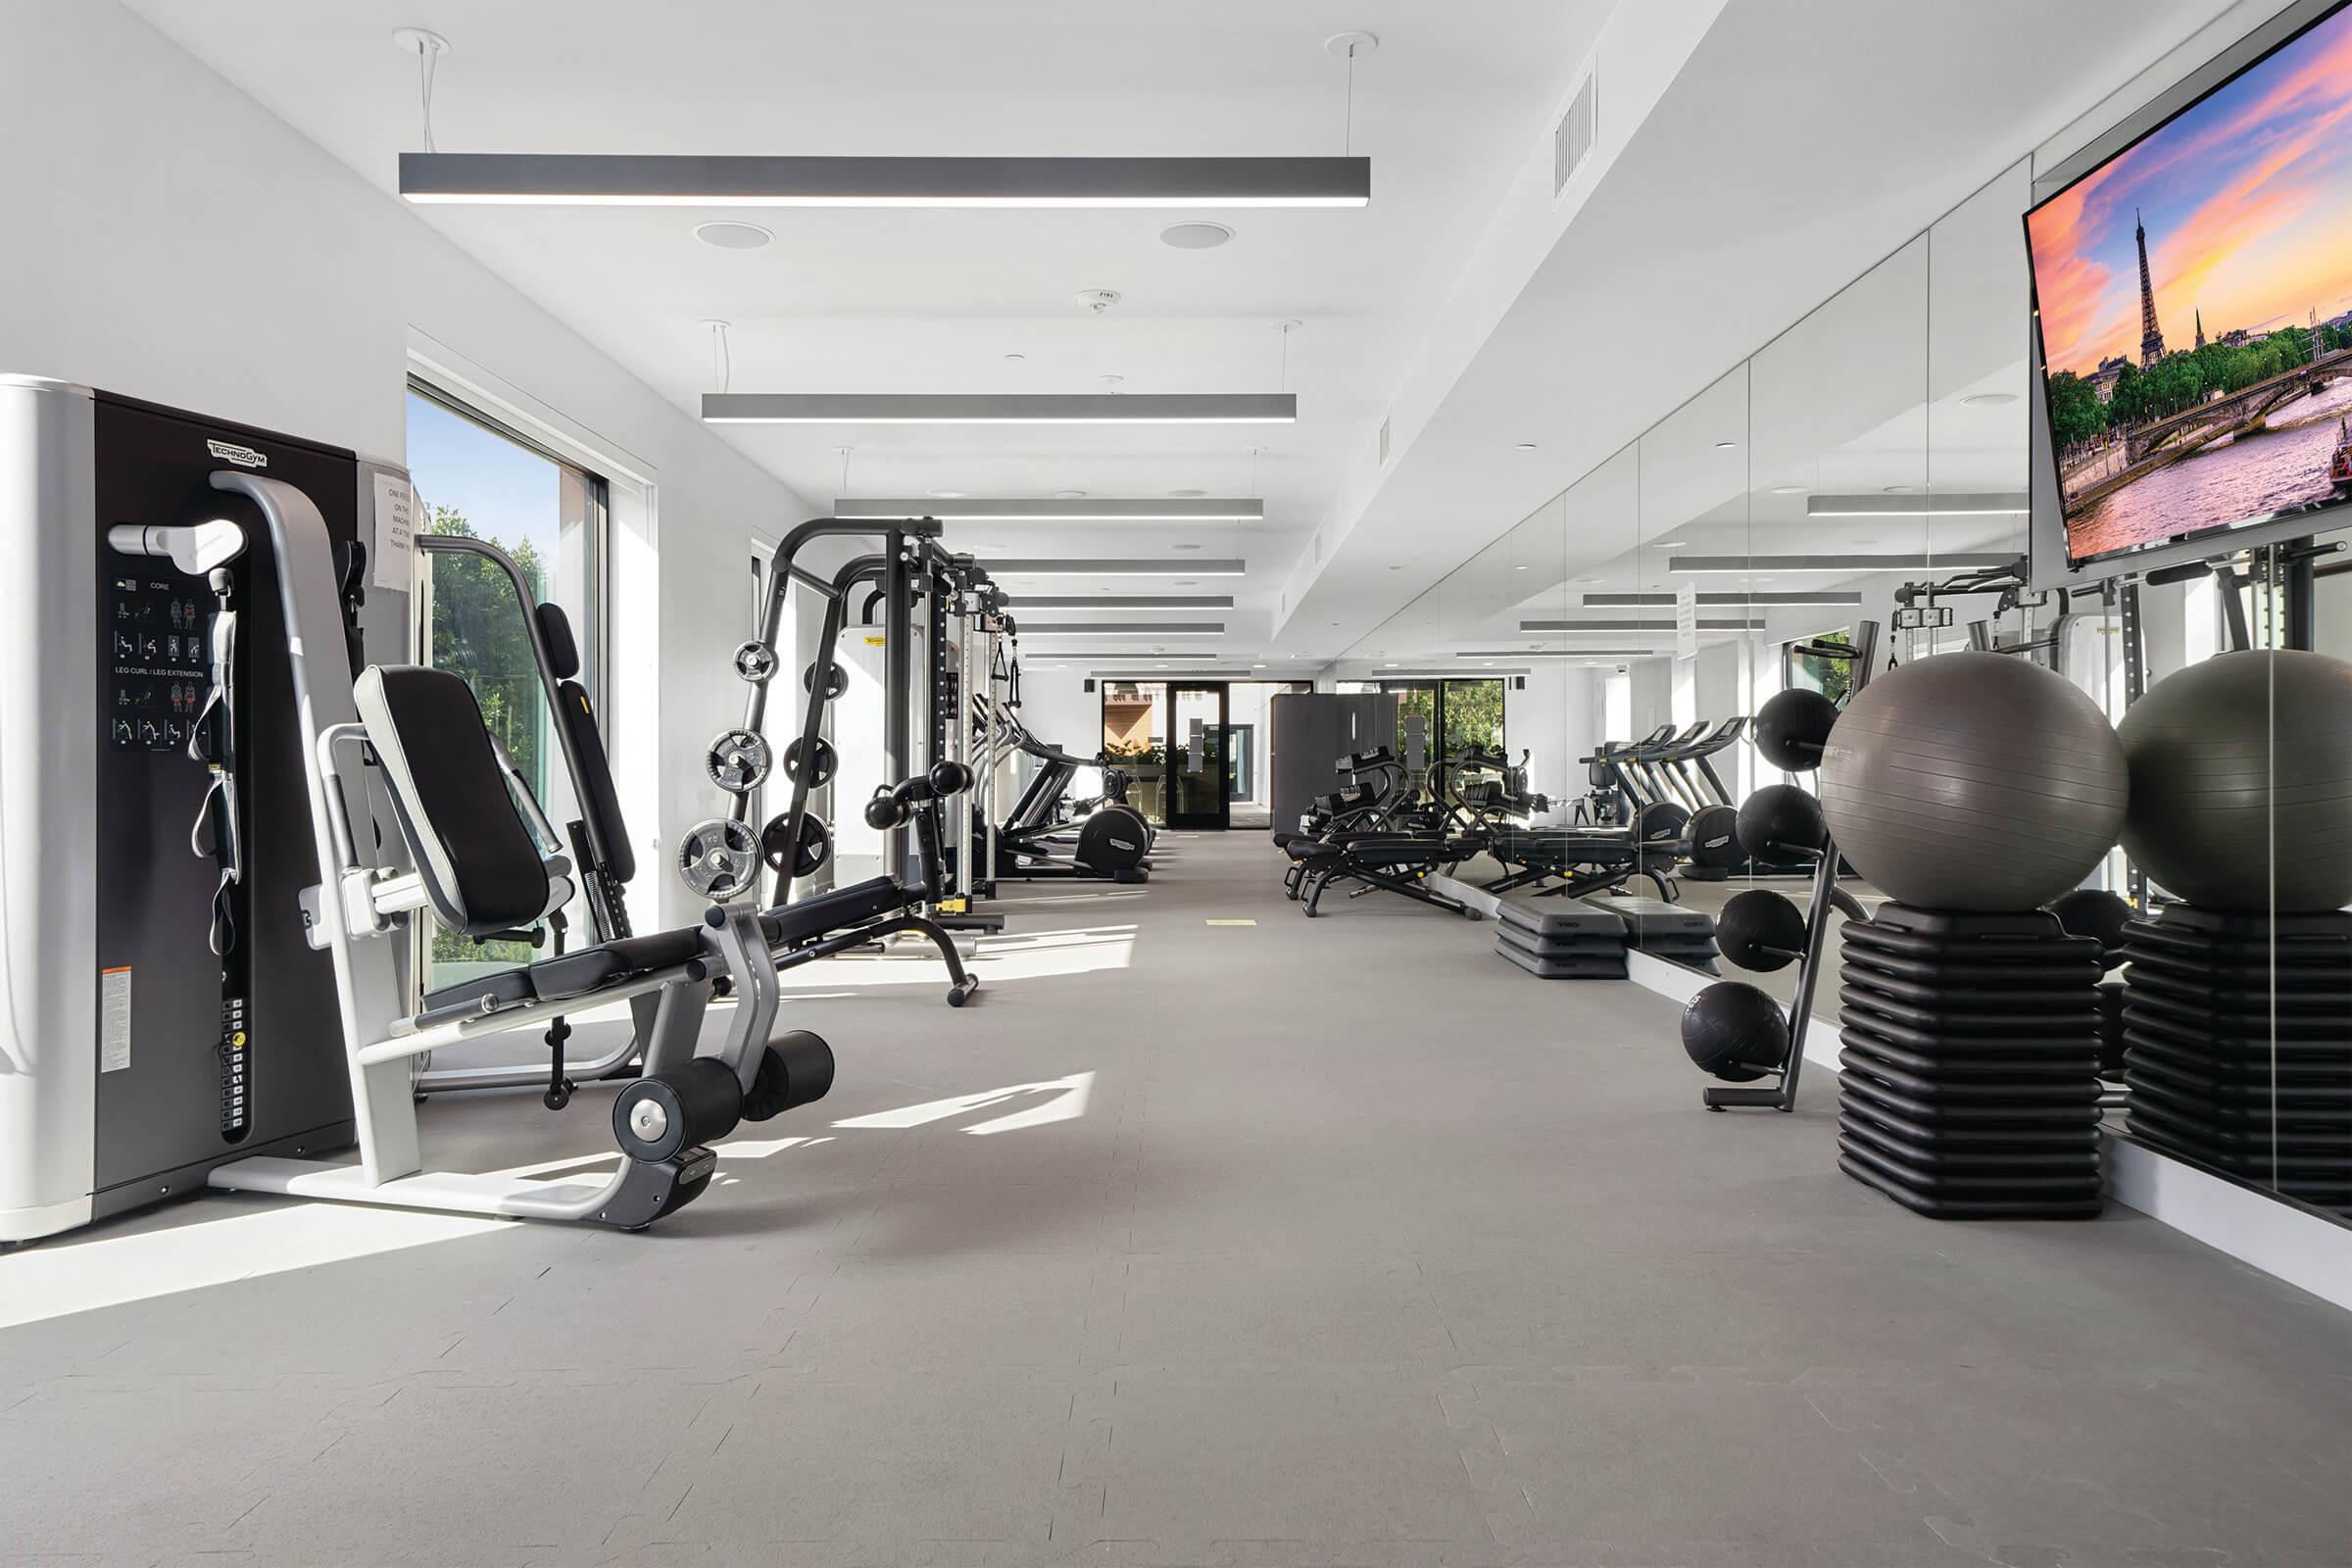 Use Prisma apartments 24 hour fitness center that features free weights, machines, cardio, and TRX